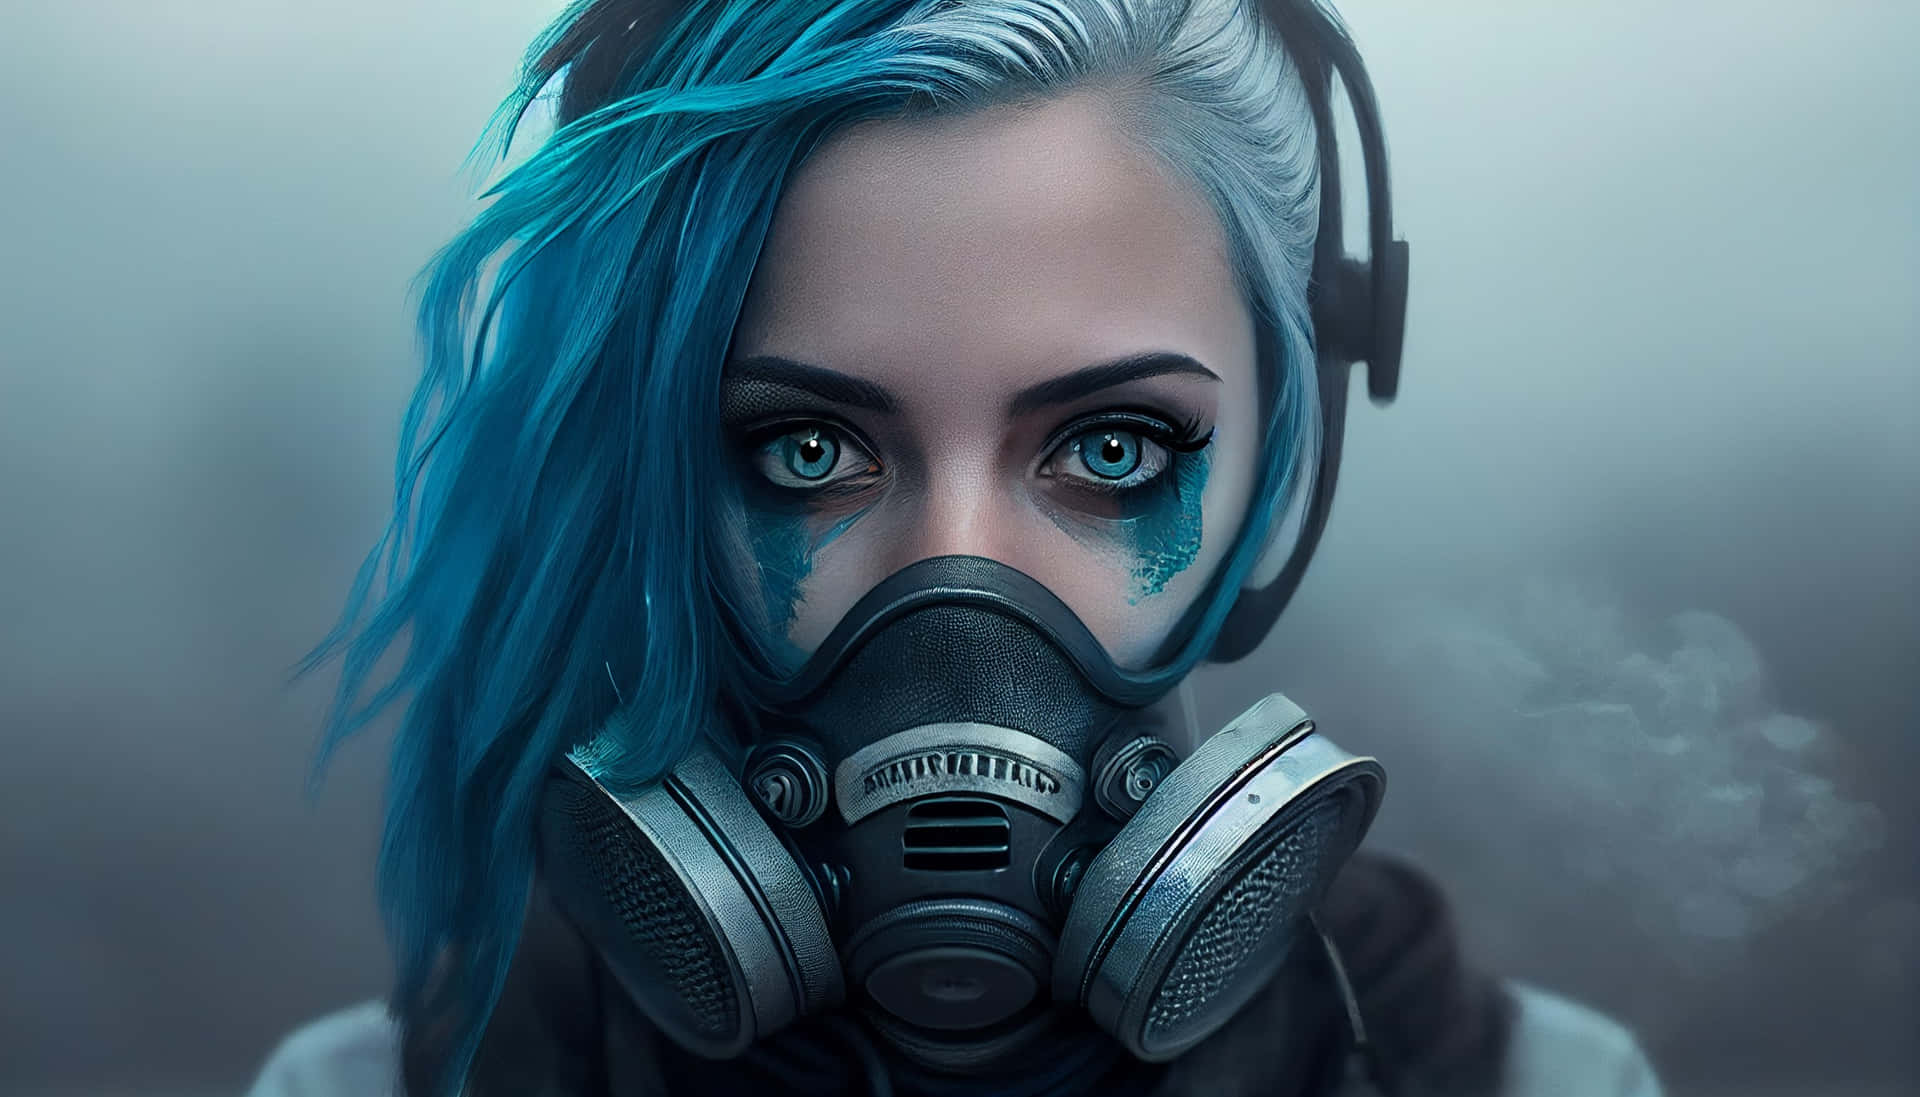 Blue Haired Woman With Gas Mask And Headphones Wallpaper